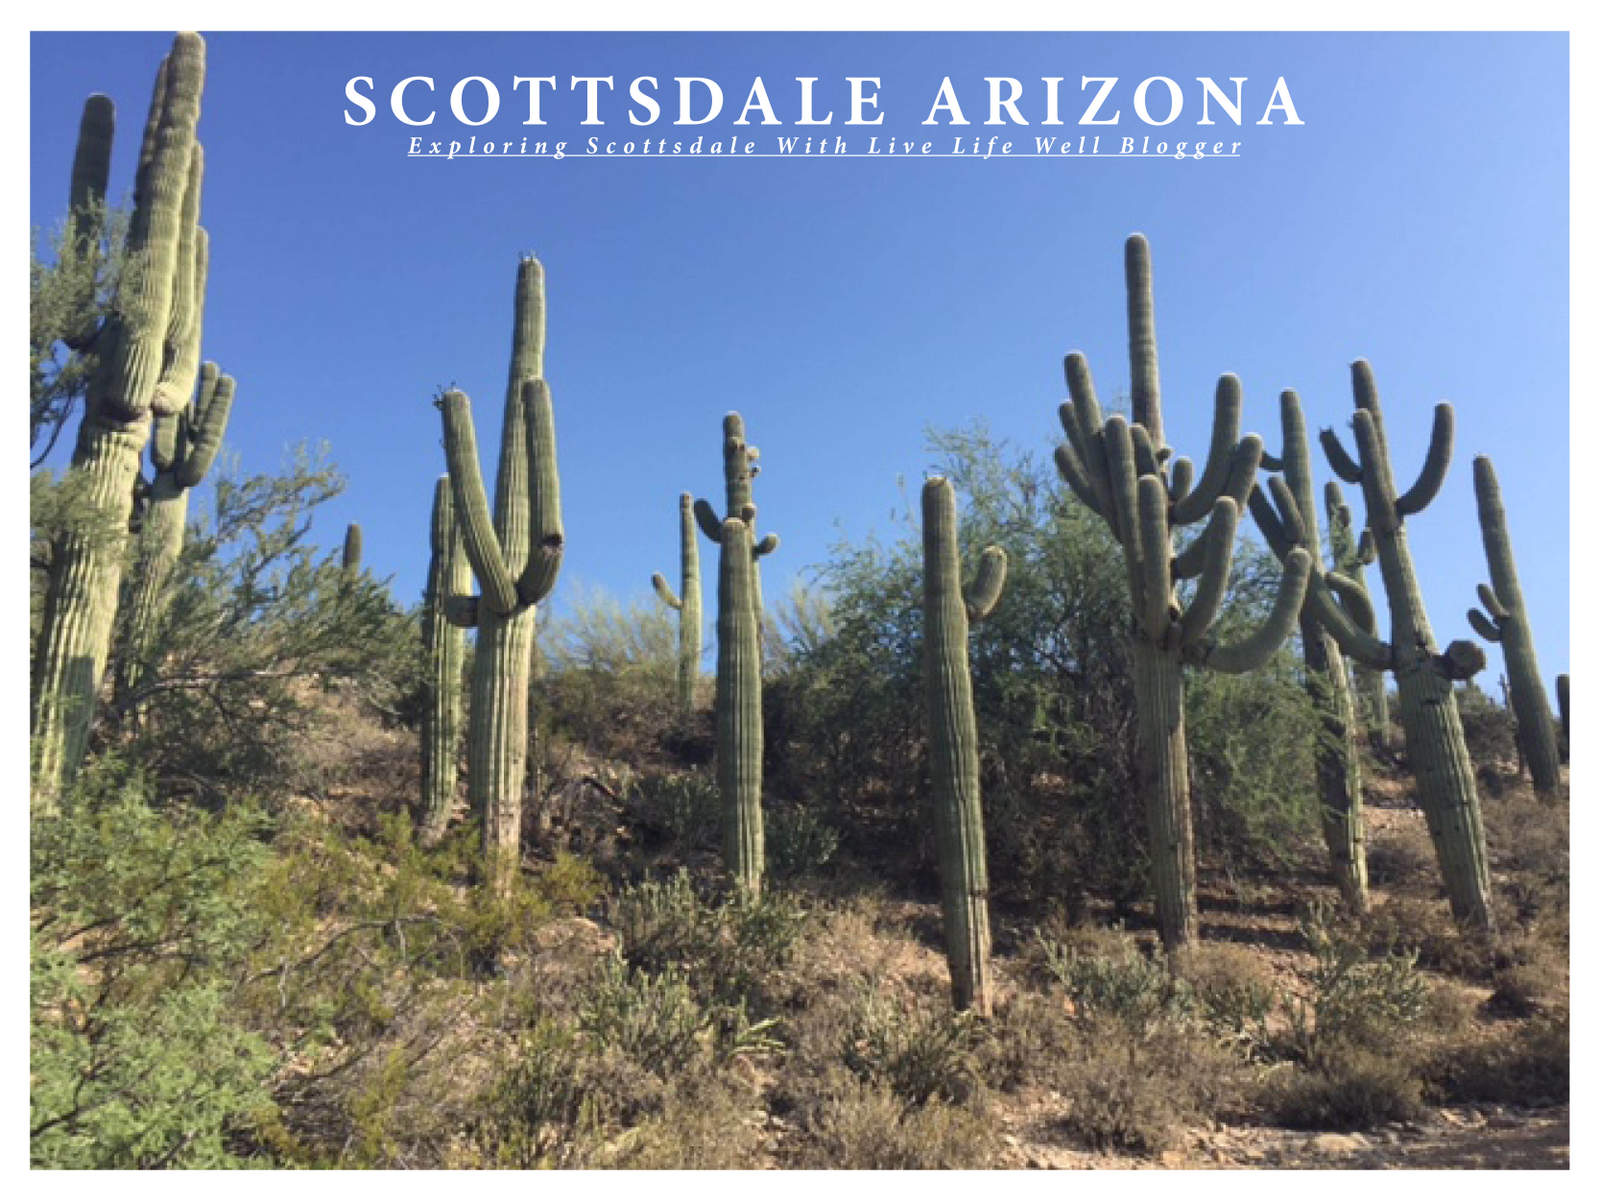 A Local's Guide To Scottsdale With Live Life Well Blogger | ItsAllBee Travel Blog